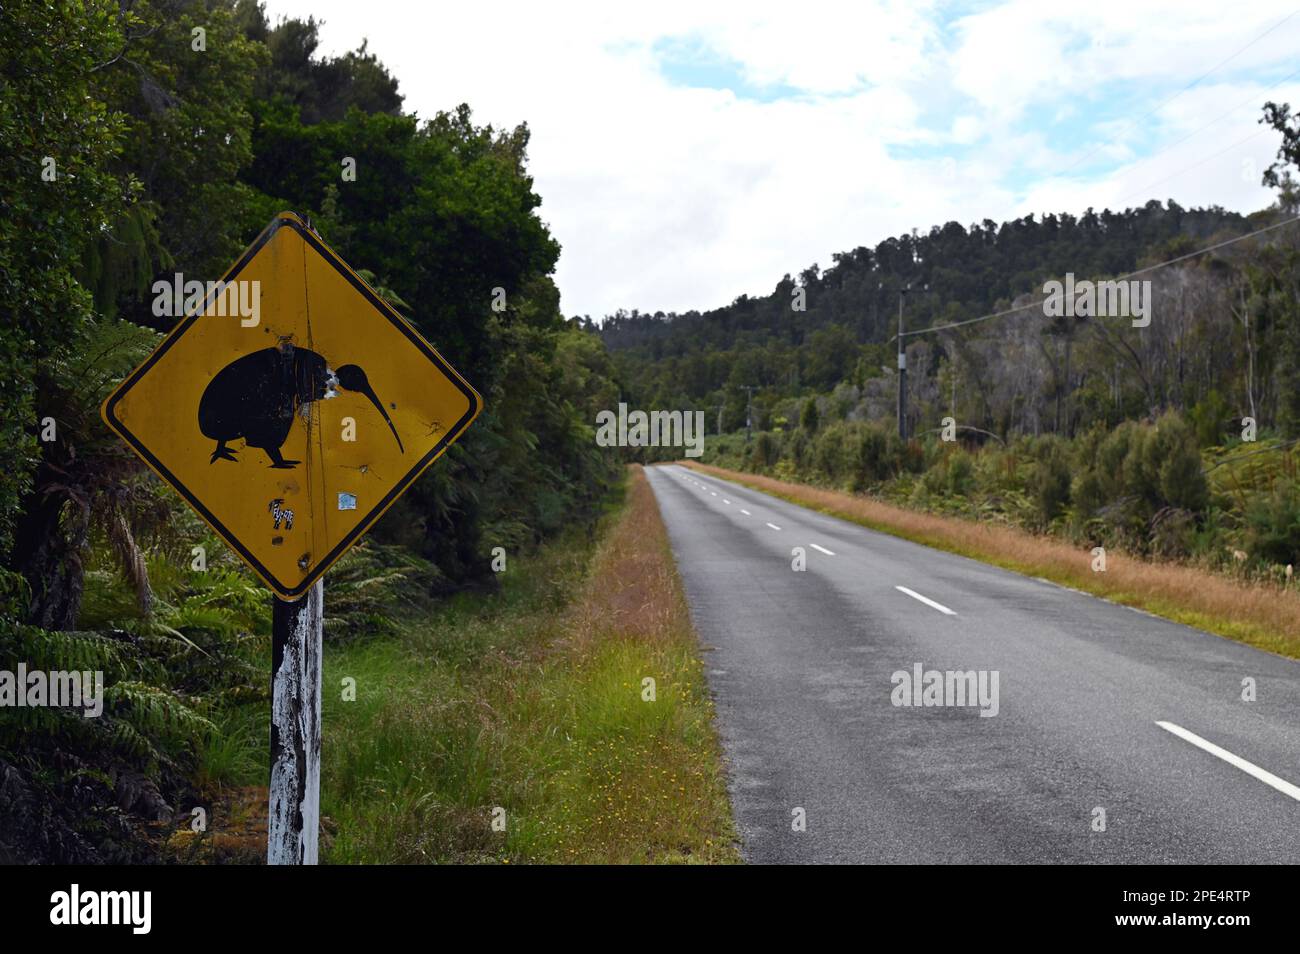 Road side signs designed to make drivers aware that Kiwis may be encountered in the area. The signs are near the West Coast settlement of Okarito Stock Photo